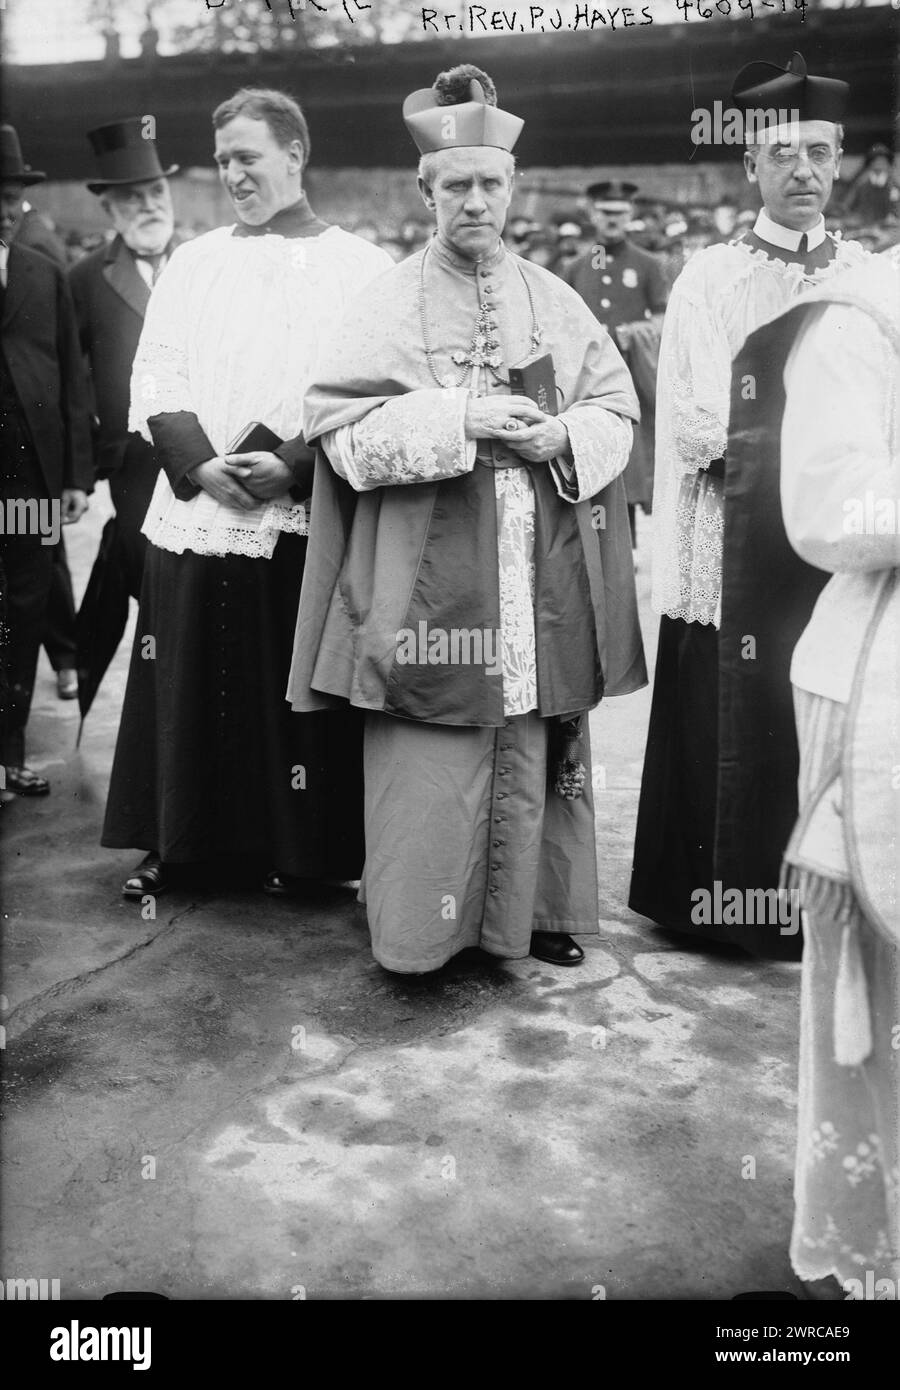 Rt. Rev. P.J. Hayes, Photograph shows Patrick Joseph Hayes (1867-1938), American cardinal of the Roman Catholic Church who was Vicar Apostolic of Military USA. He is attending the military mass at the Battery, New York City, held in May 1918 during World War I., 1918 May 30, World War, 1914-1918, Glass negatives, 1 negative: glass Stock Photo